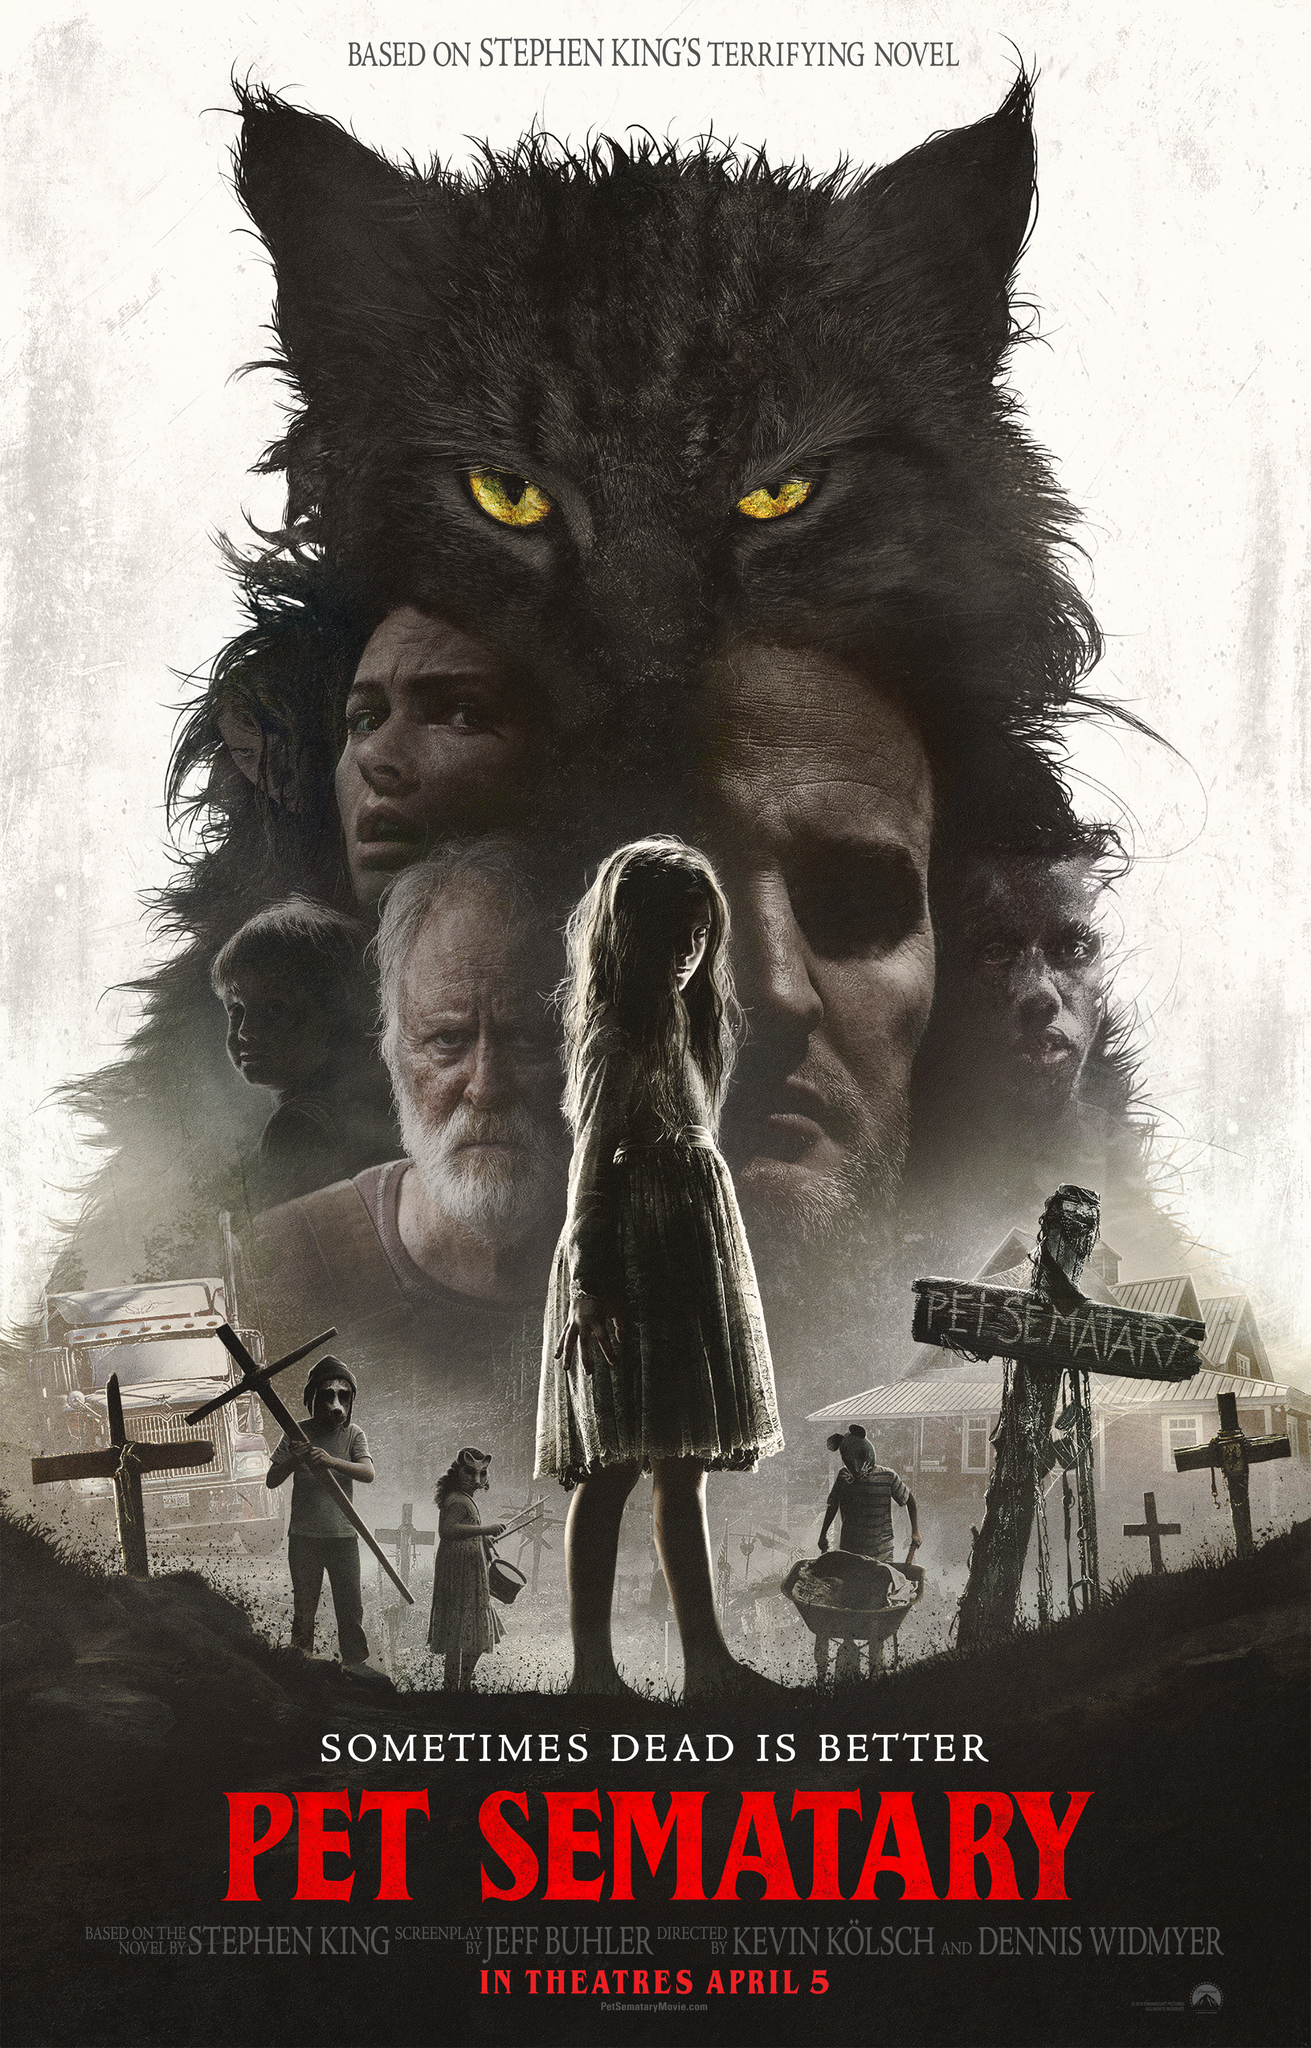 Pet Sematary film review: sometimes dead is better